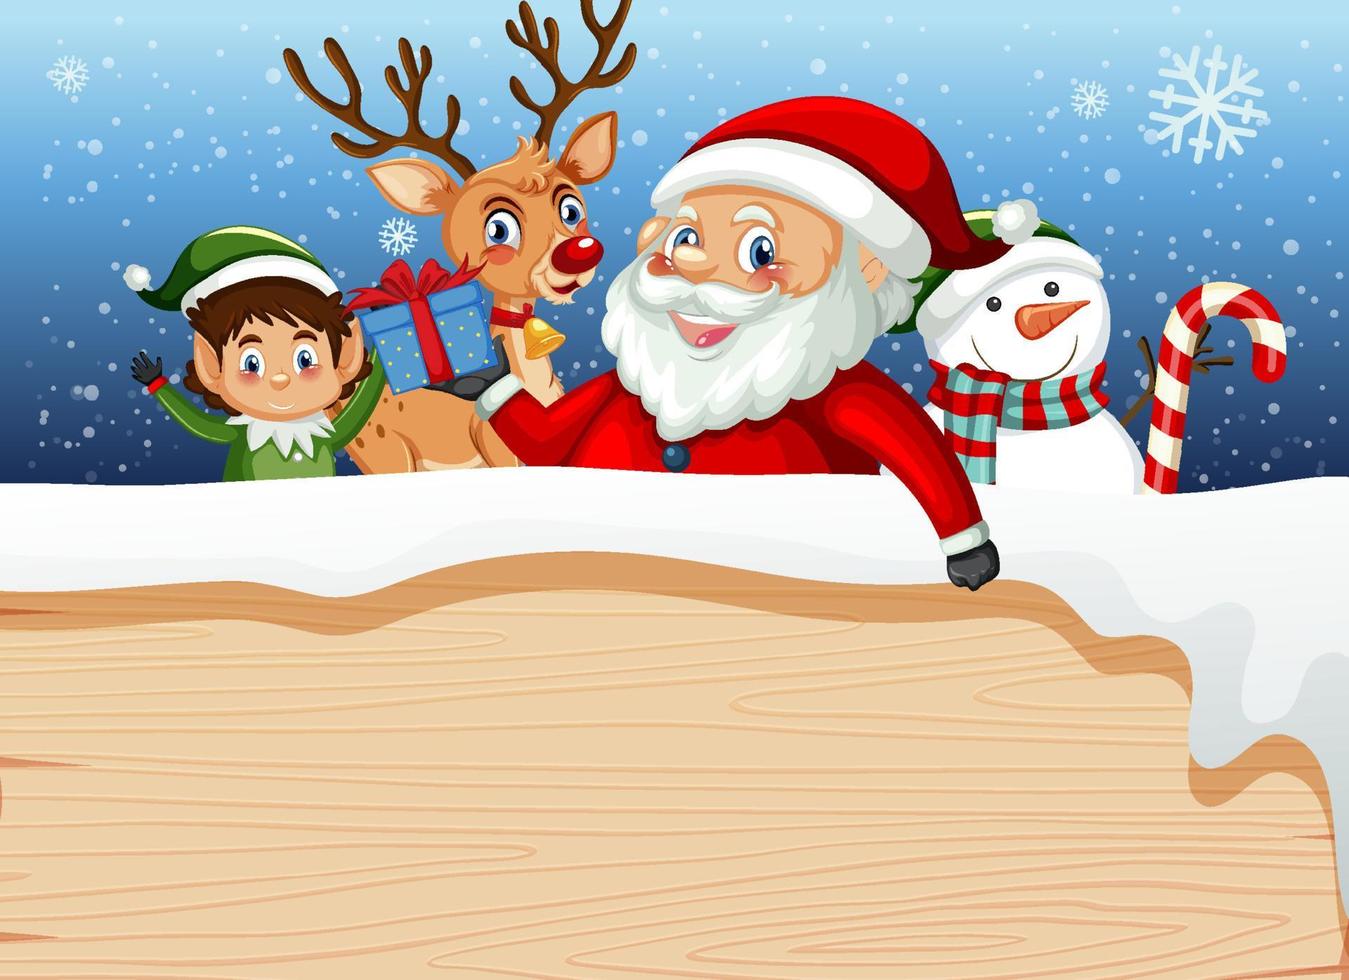 Empty banner in Christmas theme with Santa Claus and friends vector